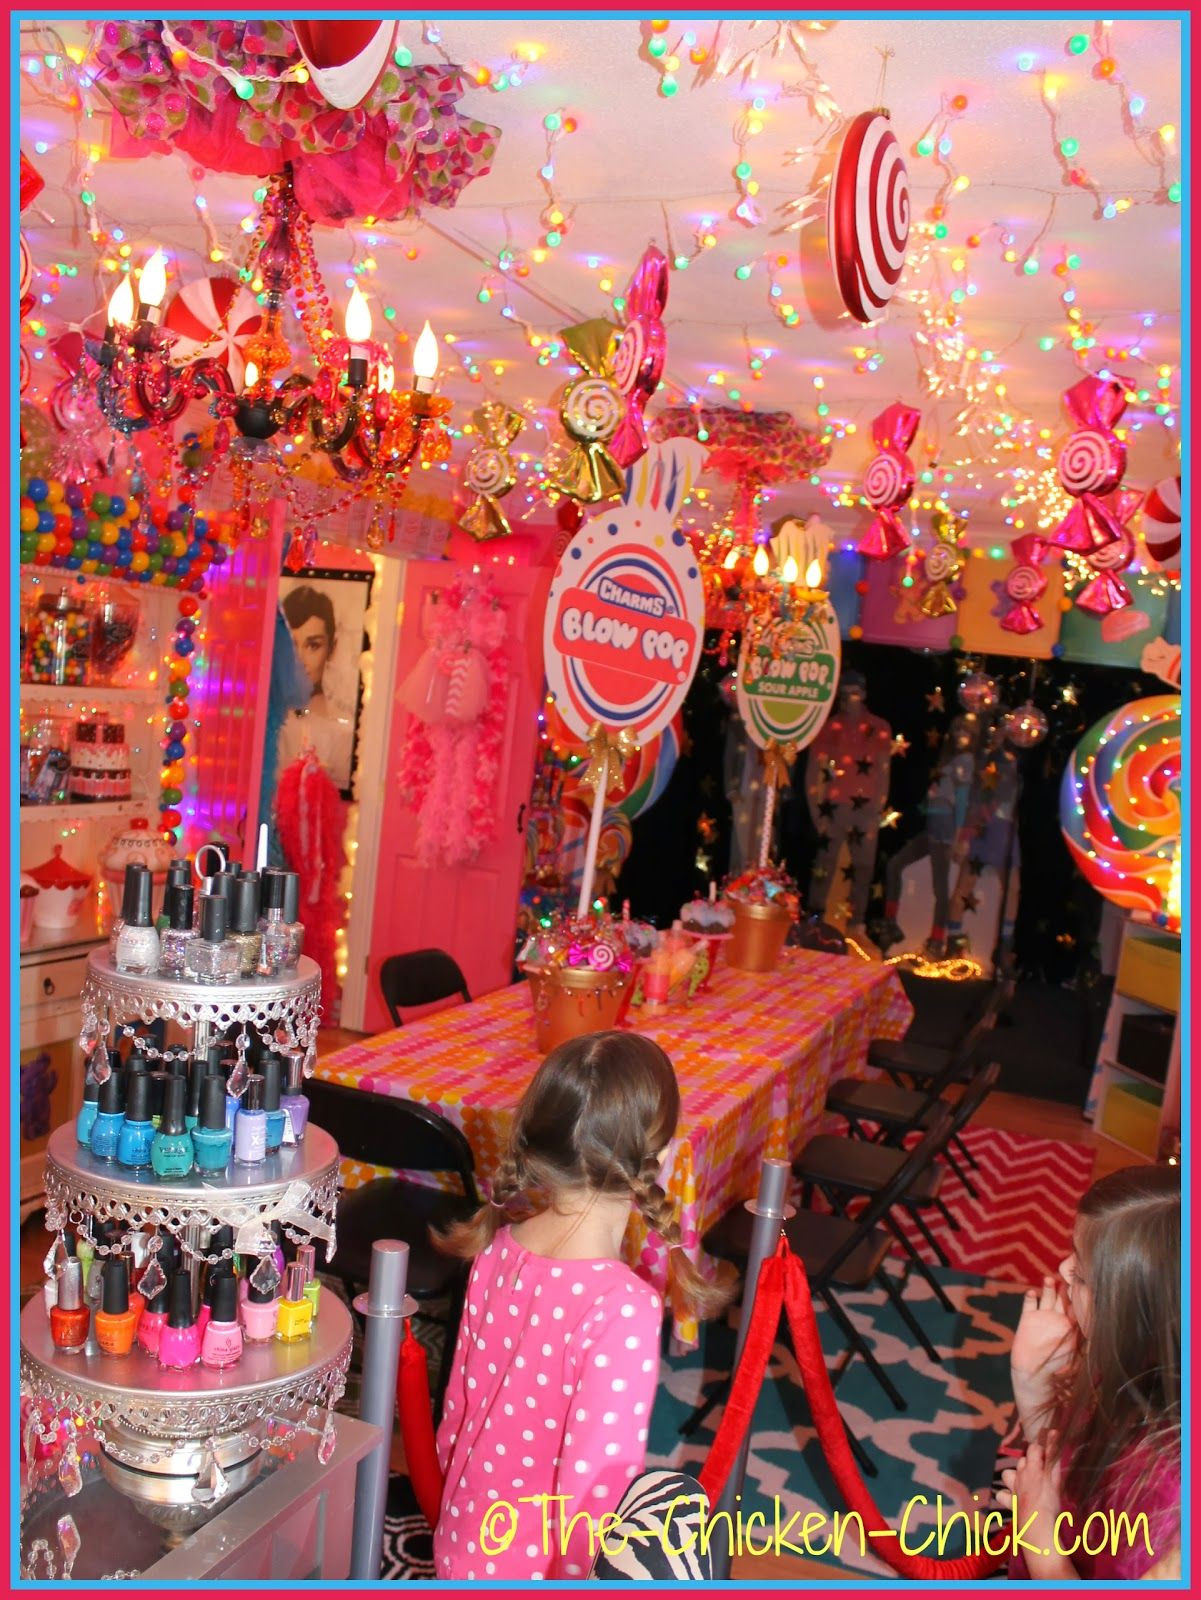 30-of-the-best-ideas-for-birthday-party-ideas-for-10-year-old-girl